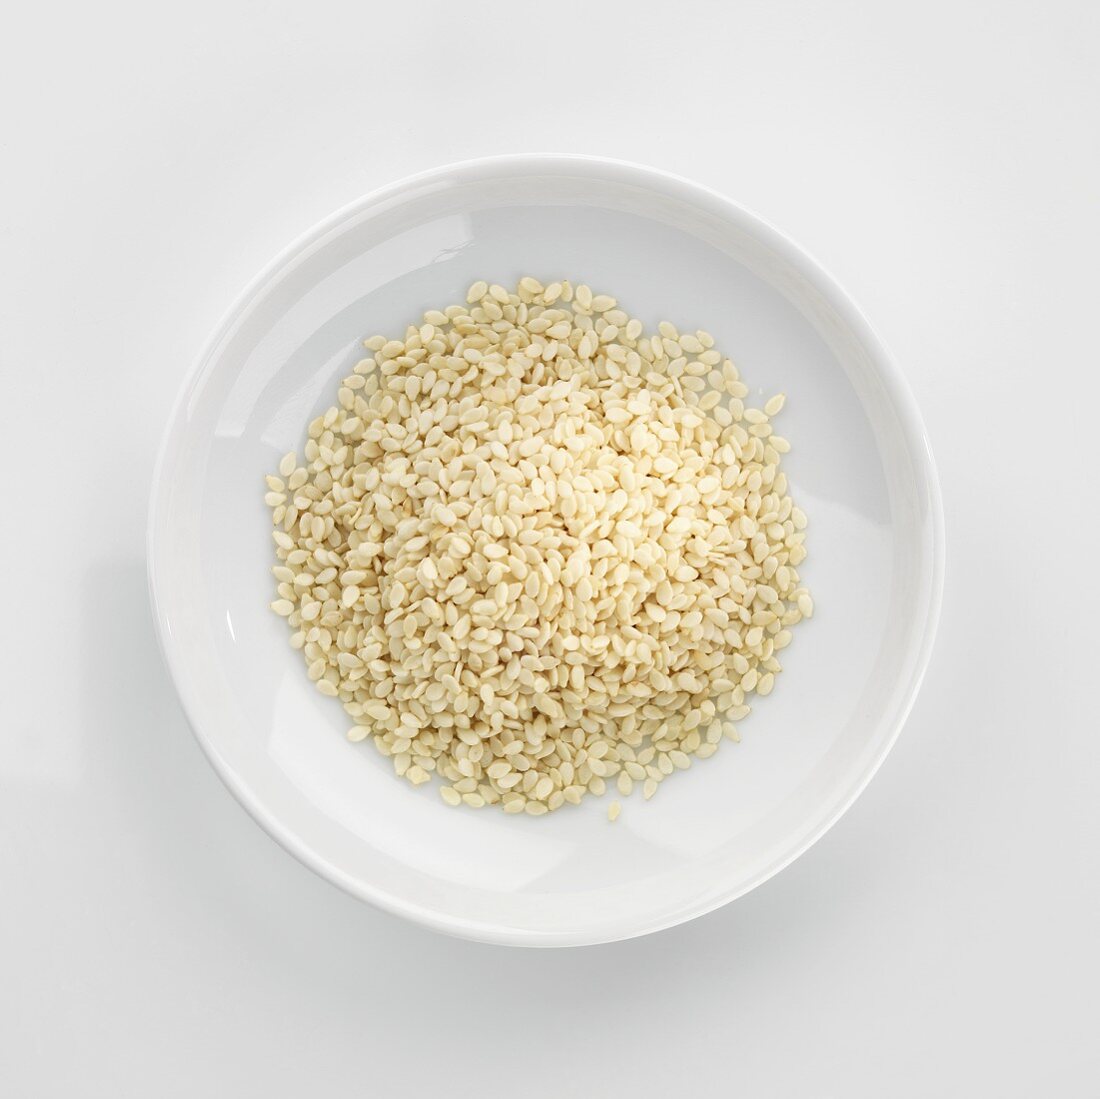 Sesame seed, hulled, in white dish